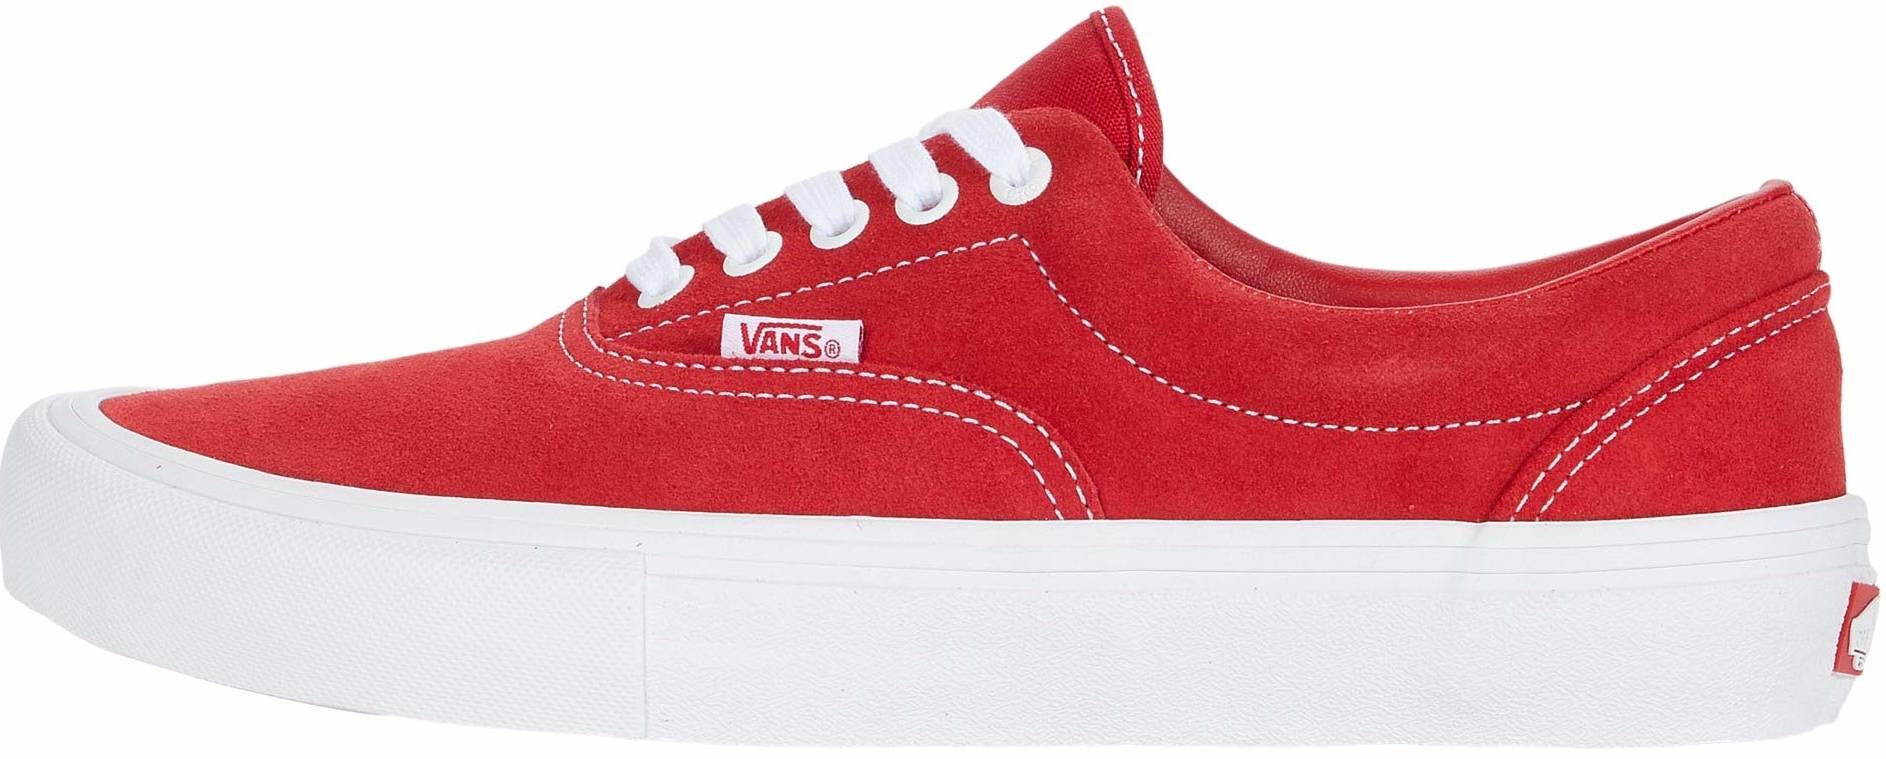 Only $35 + Review of Vans Era Pro 